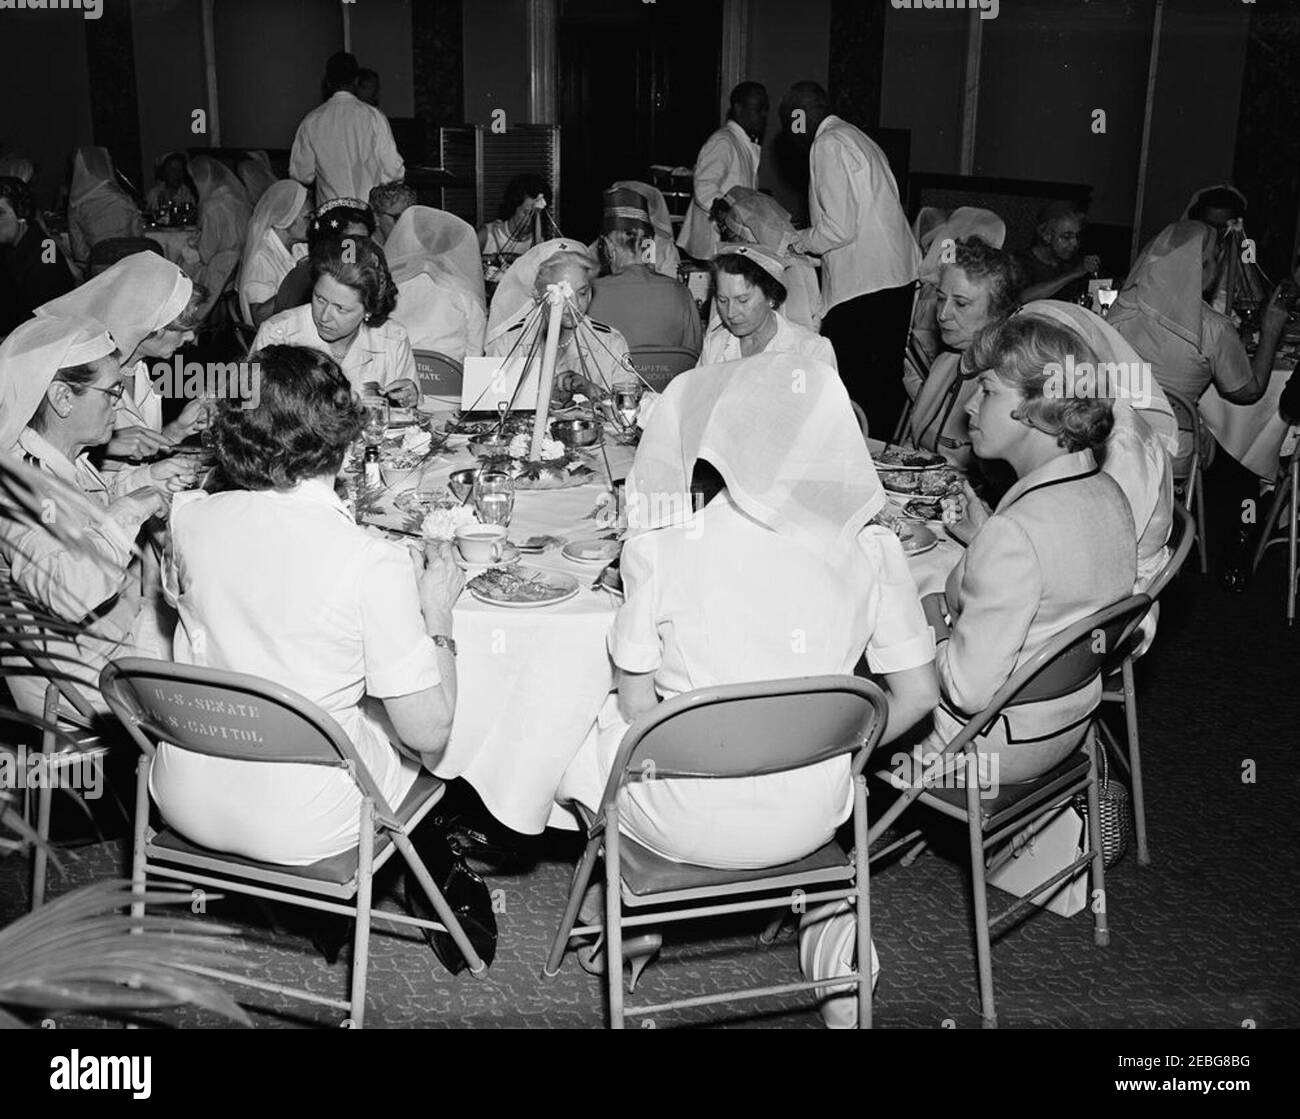 First Lady Jacqueline Kennedy (JBK) attends the Senate Ladiesu0027 Red Cross Unit Luncheon. Members of the Senate Ladies Red Cross Unit sit at a table during a luncheon (attended by First Lady Jacqueline Kennedy) in the Old Supreme Court Chamber, United States Capitol Building, Washington, D.C. The Red Cross unit (also known as u201cLadies of the Senateu201d) is comprised of the wives of members of the US Senate. Those seated at table in foreground include: Mary Elizabeth Kem, wife of former Senator James Kem (Missouri); Lucretia Engle (back to camera), wife of Senator Clair Engle (Californ Stock Photo